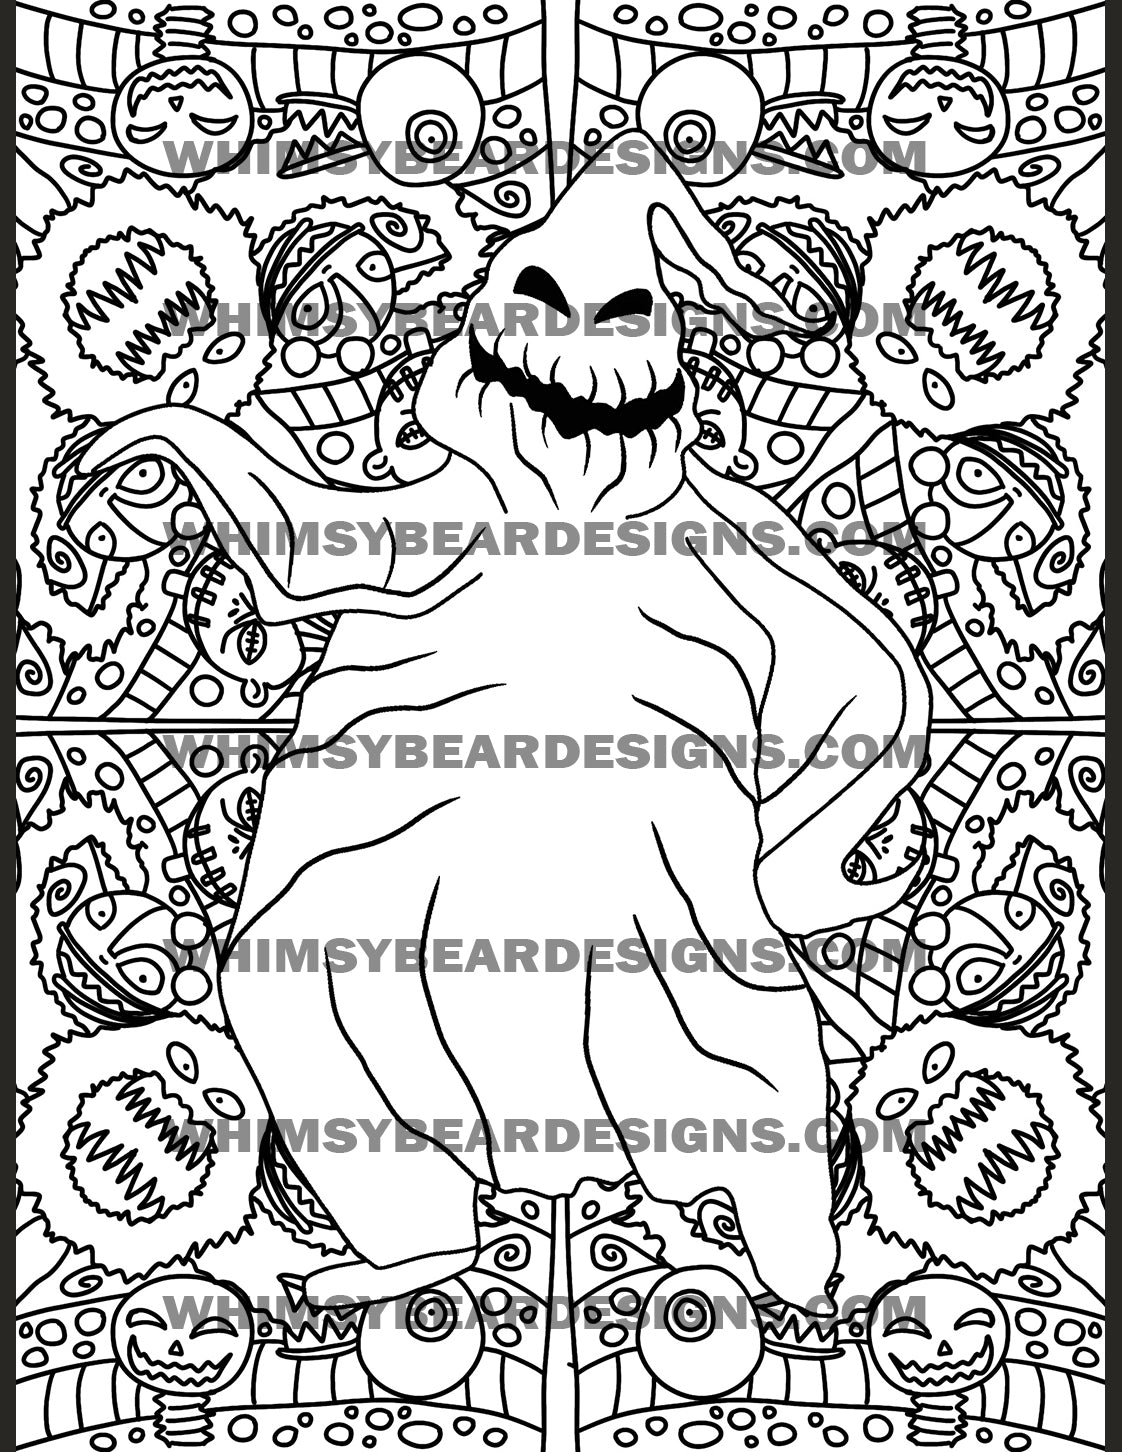 Nightmare before christmas coloring sheets â whimsy bear